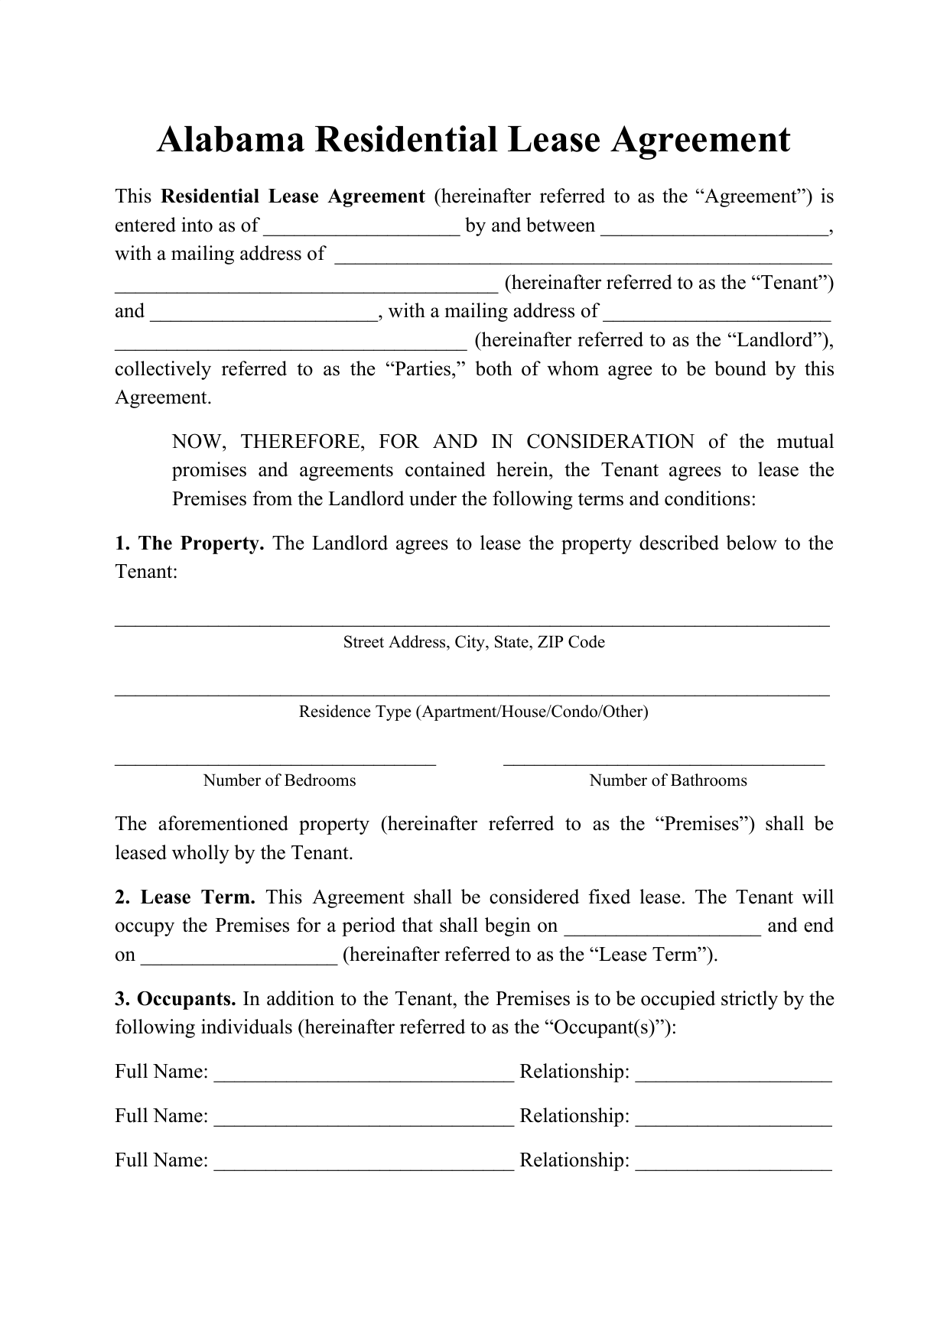 alabama-residential-lease-agreement-template-download-printable-pdf